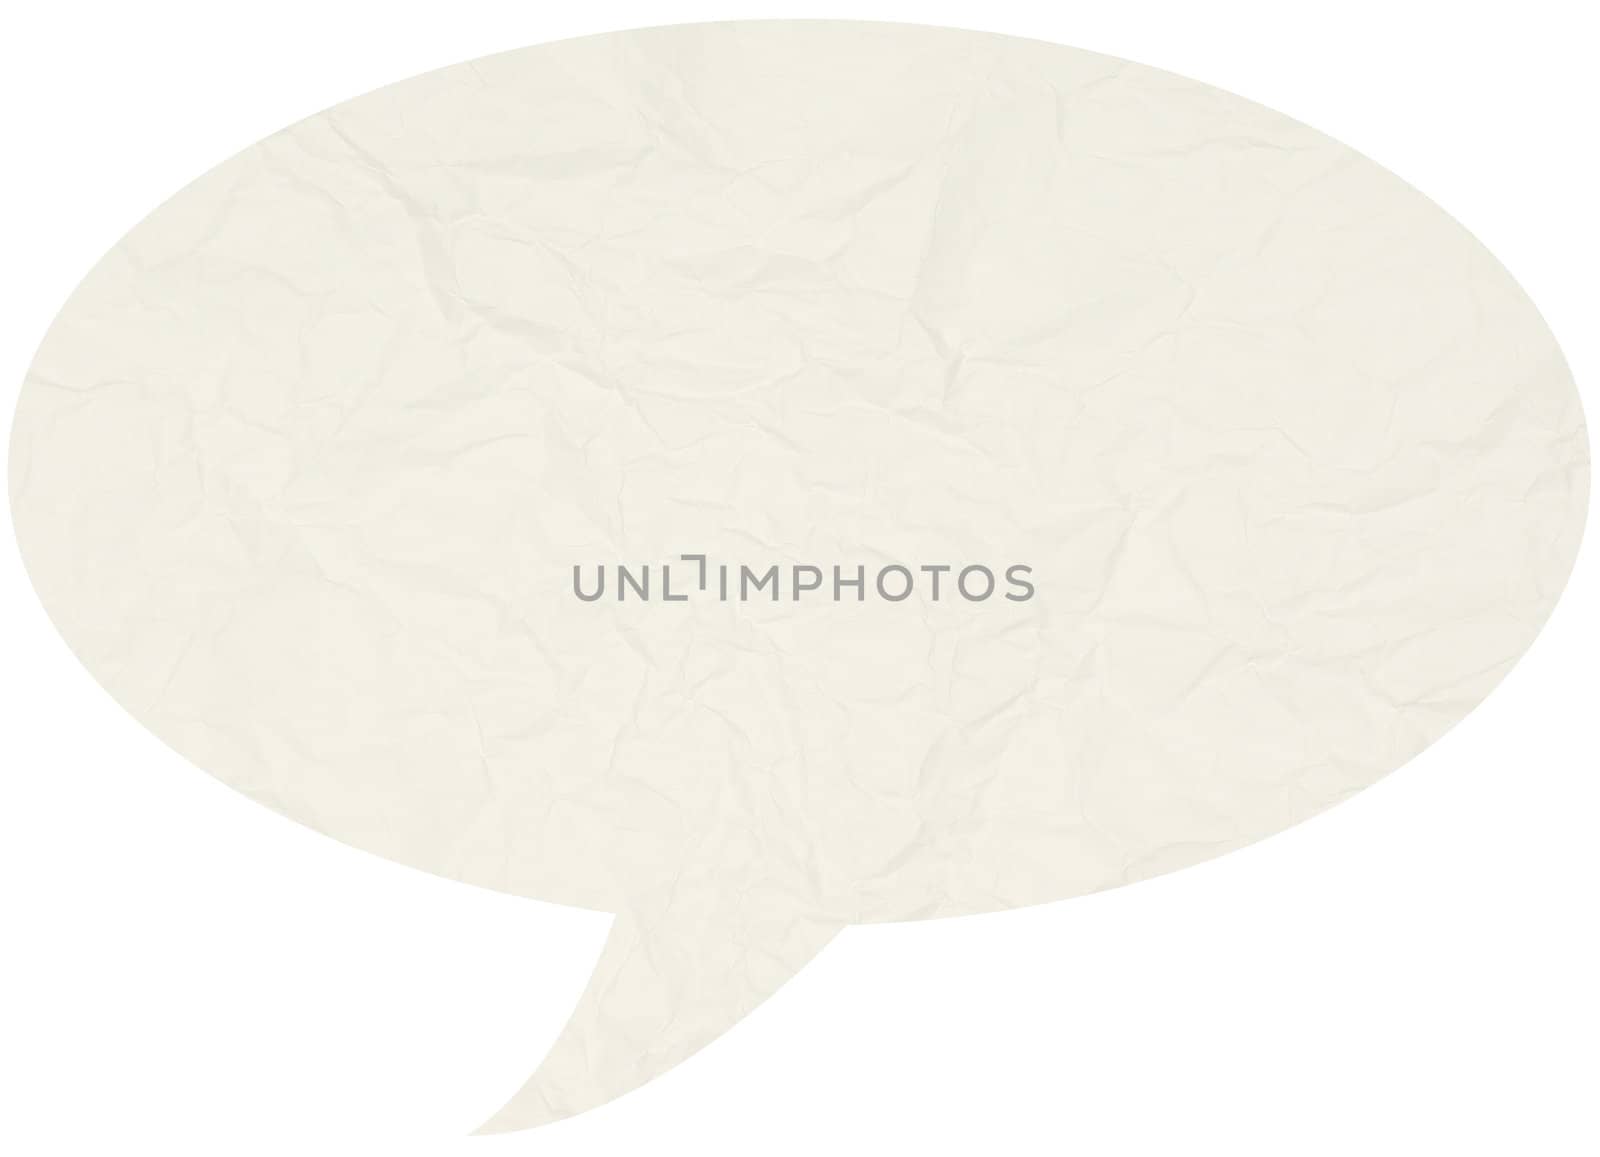 Crumpled comic speech bubble isolated in white